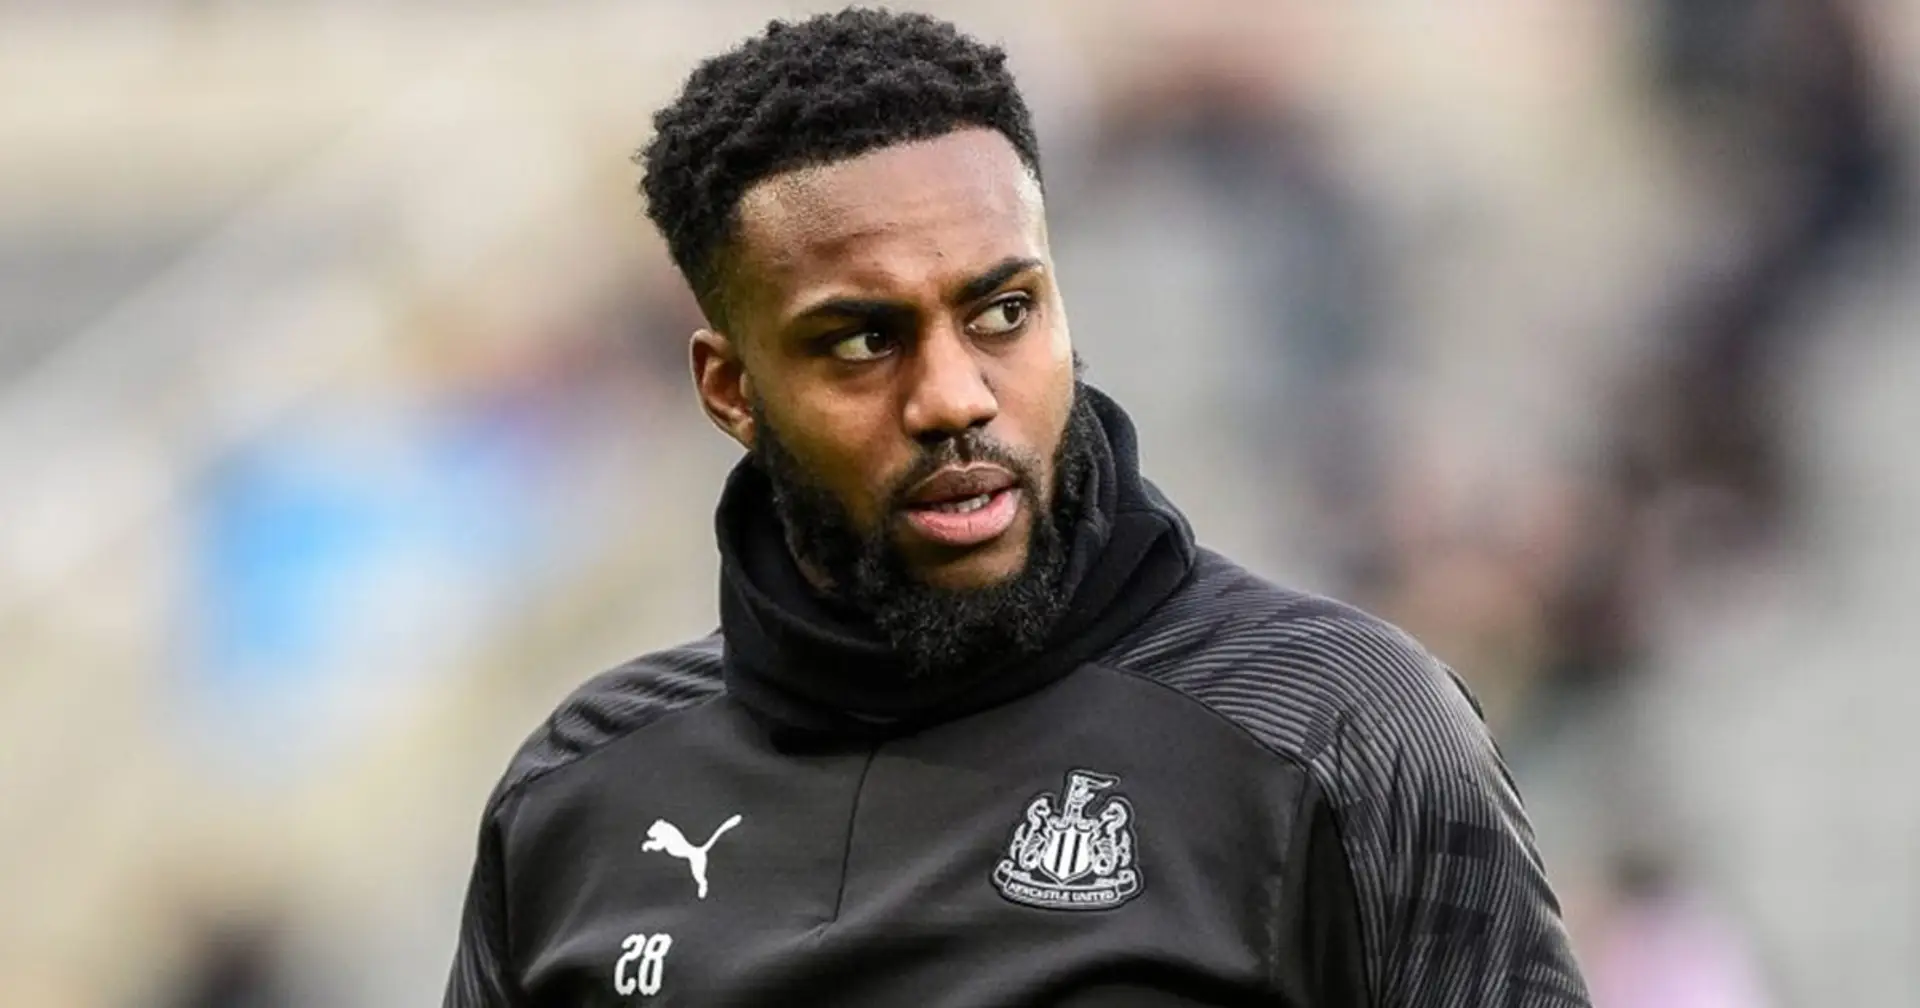 Danny Rose: 'Government's saying bring back football to boost the morale of the nation. I don't give a f*** about the nation's morale. People's lives are at risk!'